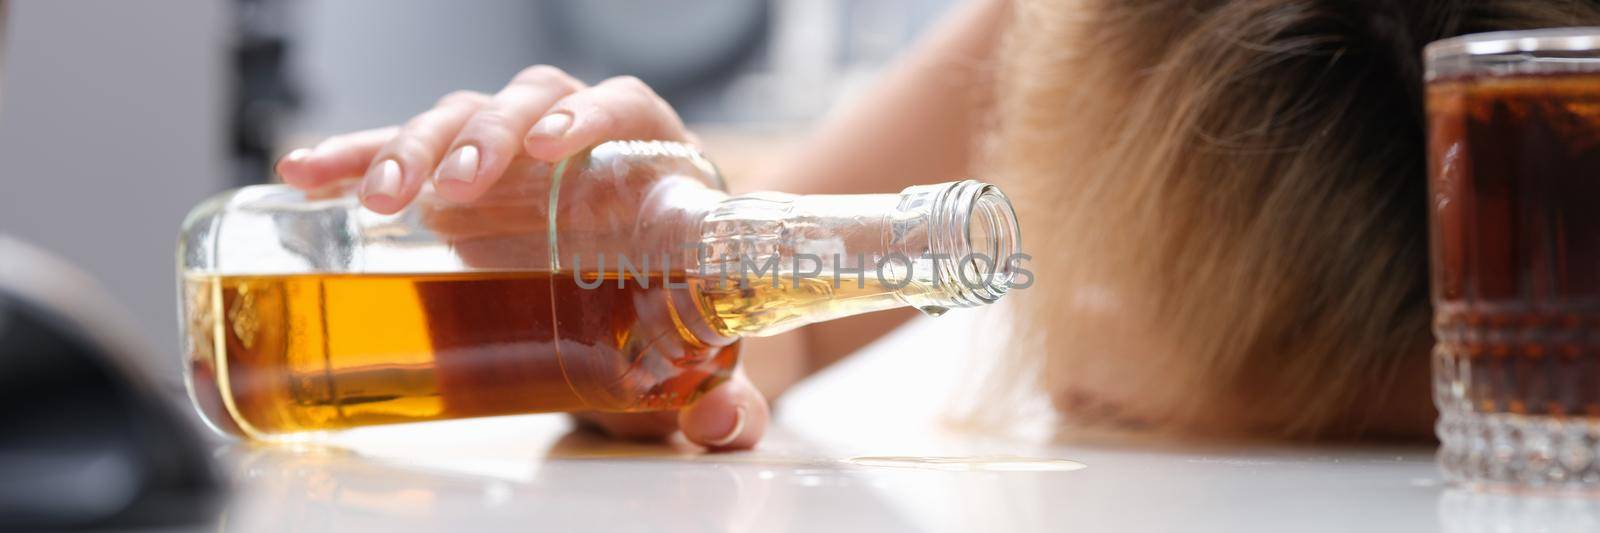 Woman sleeping at table with bottle of alcohol in her hands closeup by kuprevich